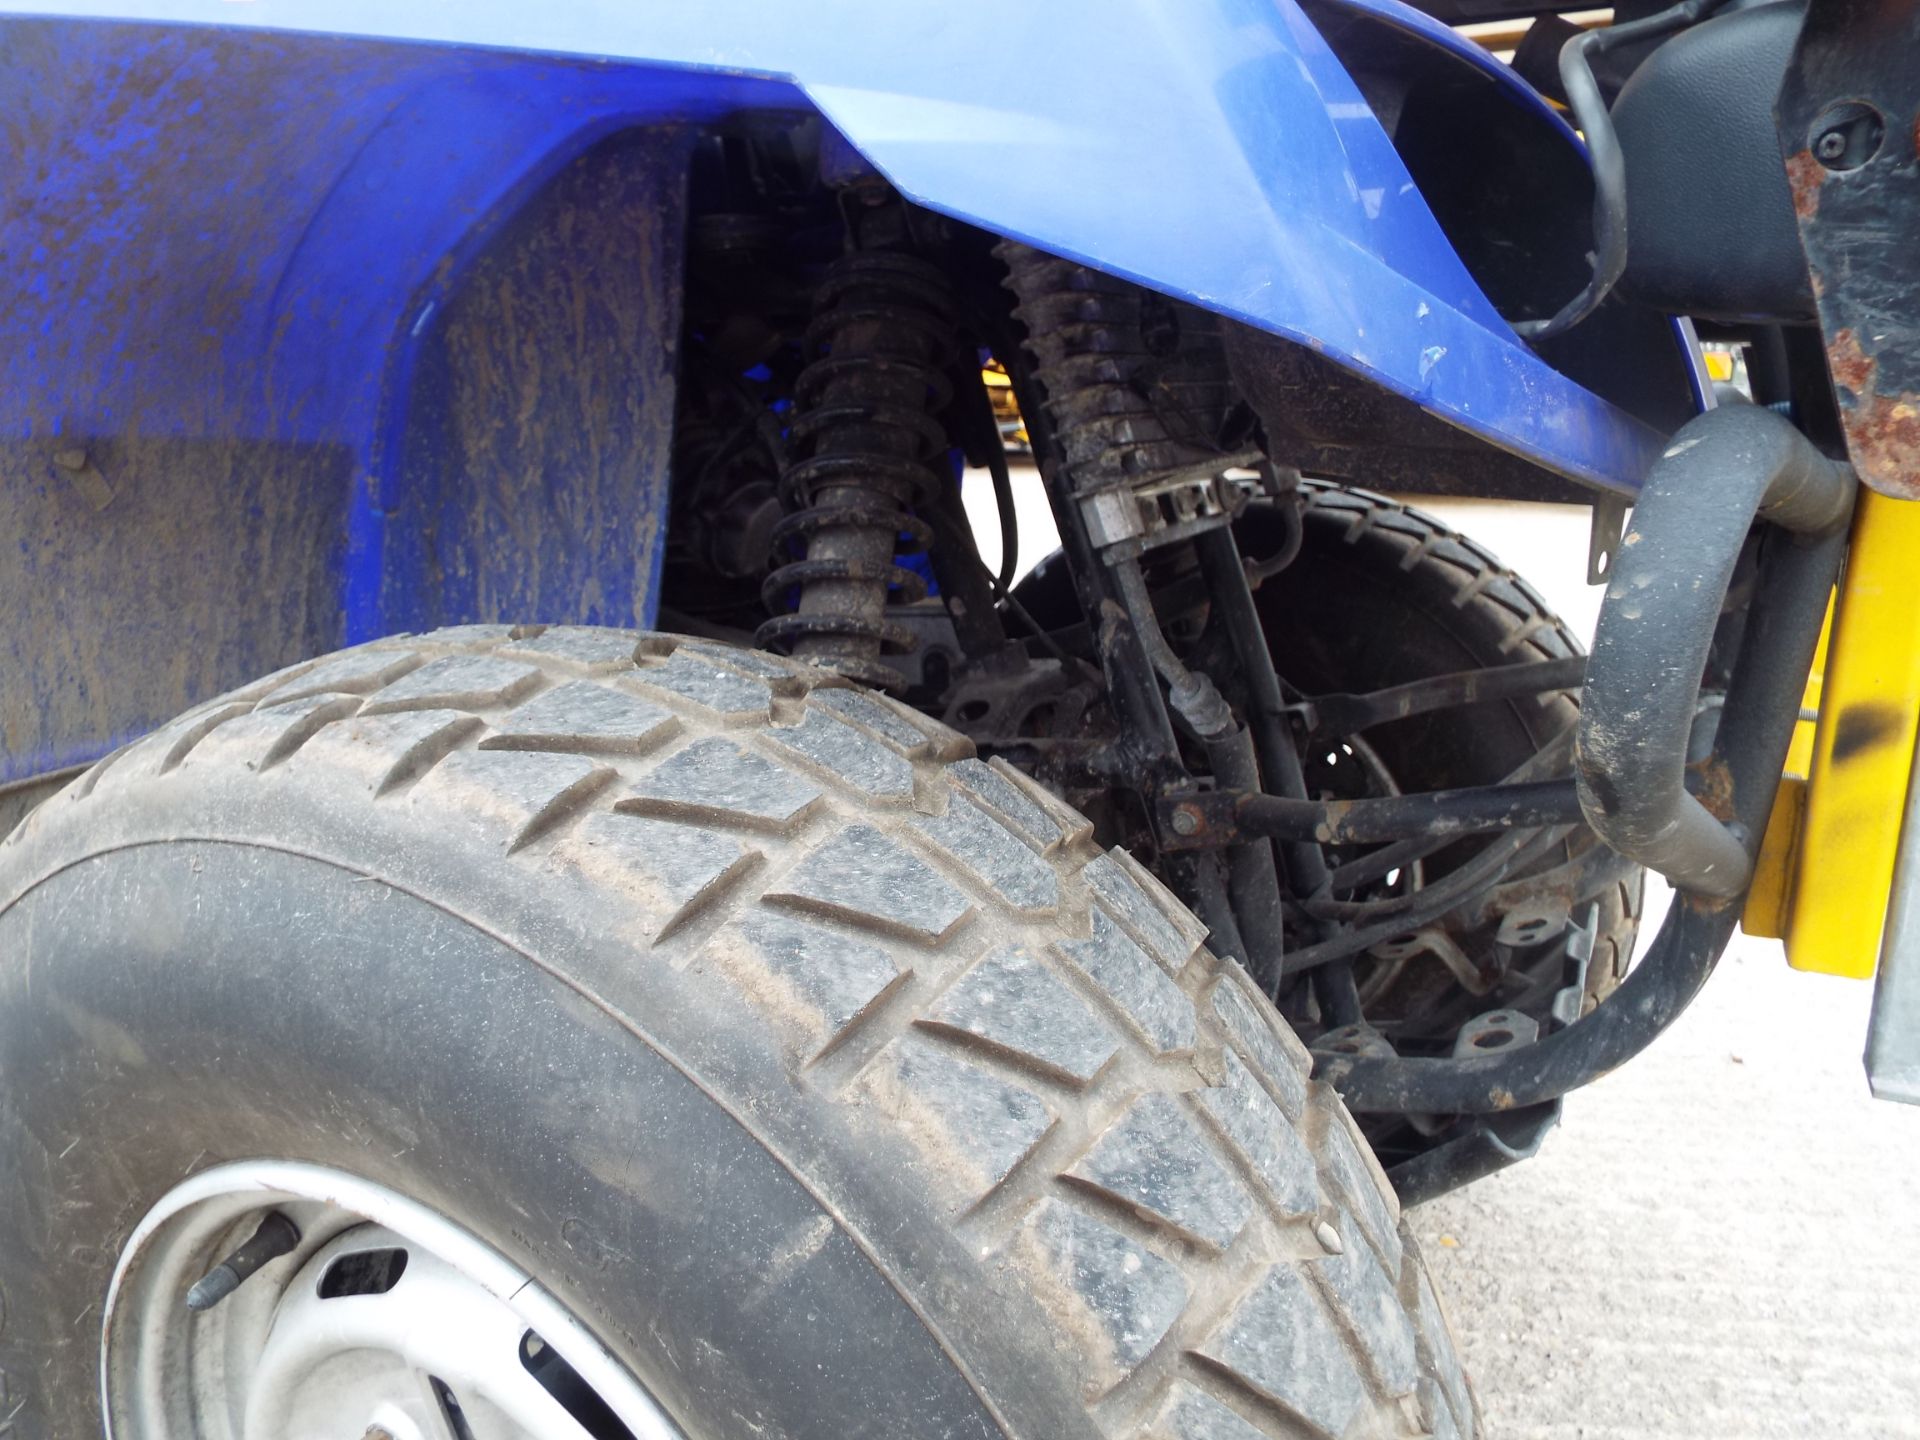 2008 Yamaha Grizzly 350 Ultramatic Quad Bike fitted with Vale Front/Rear Spraying Equipment - Image 24 of 26